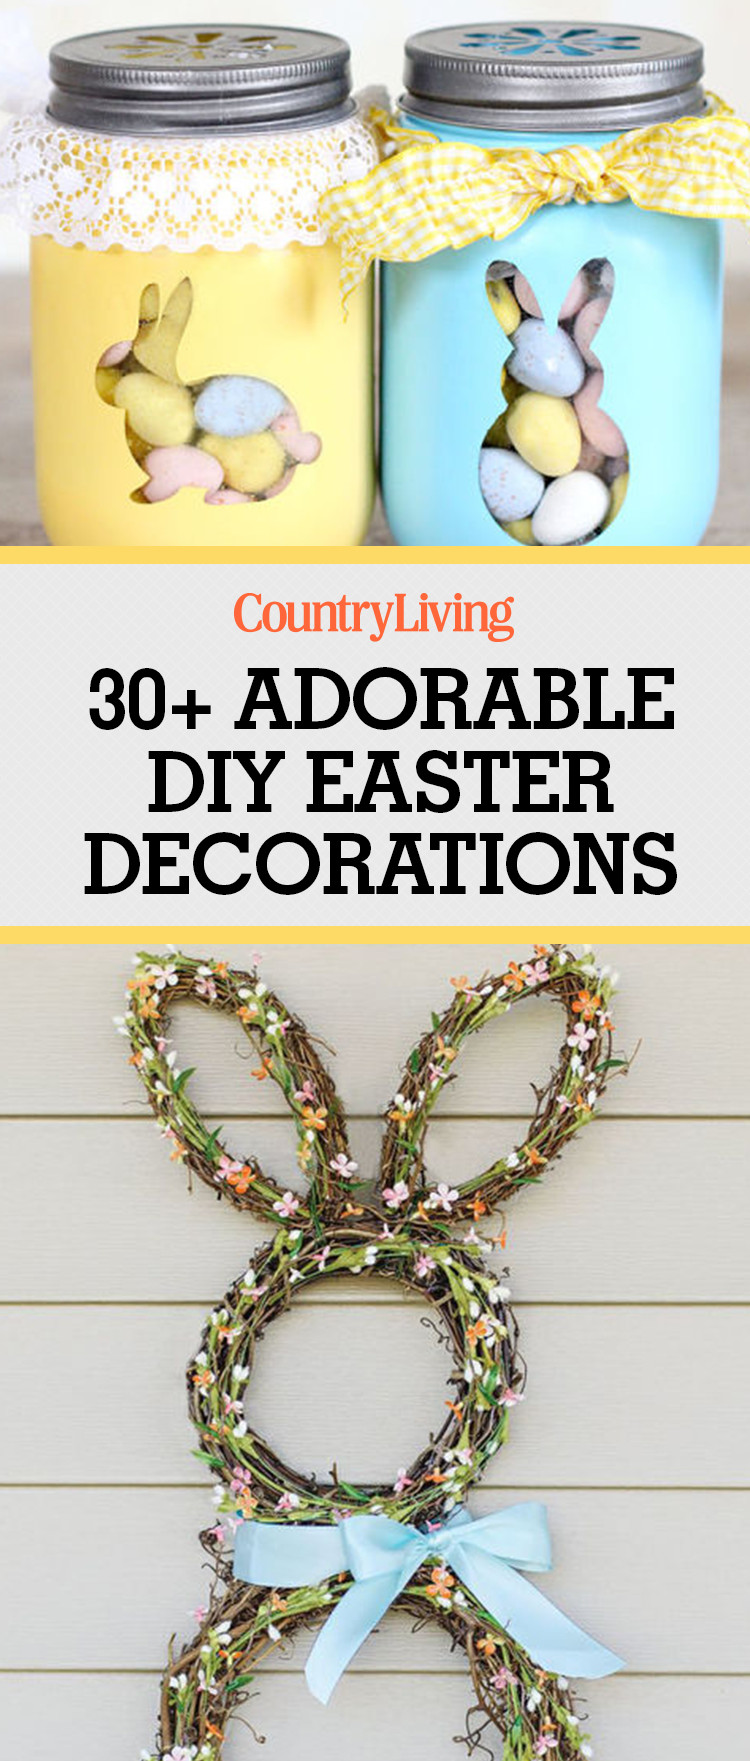 DIY Decorations Pinterest
 30 DIY Easter Decorations from Pinterest Homemade Easter